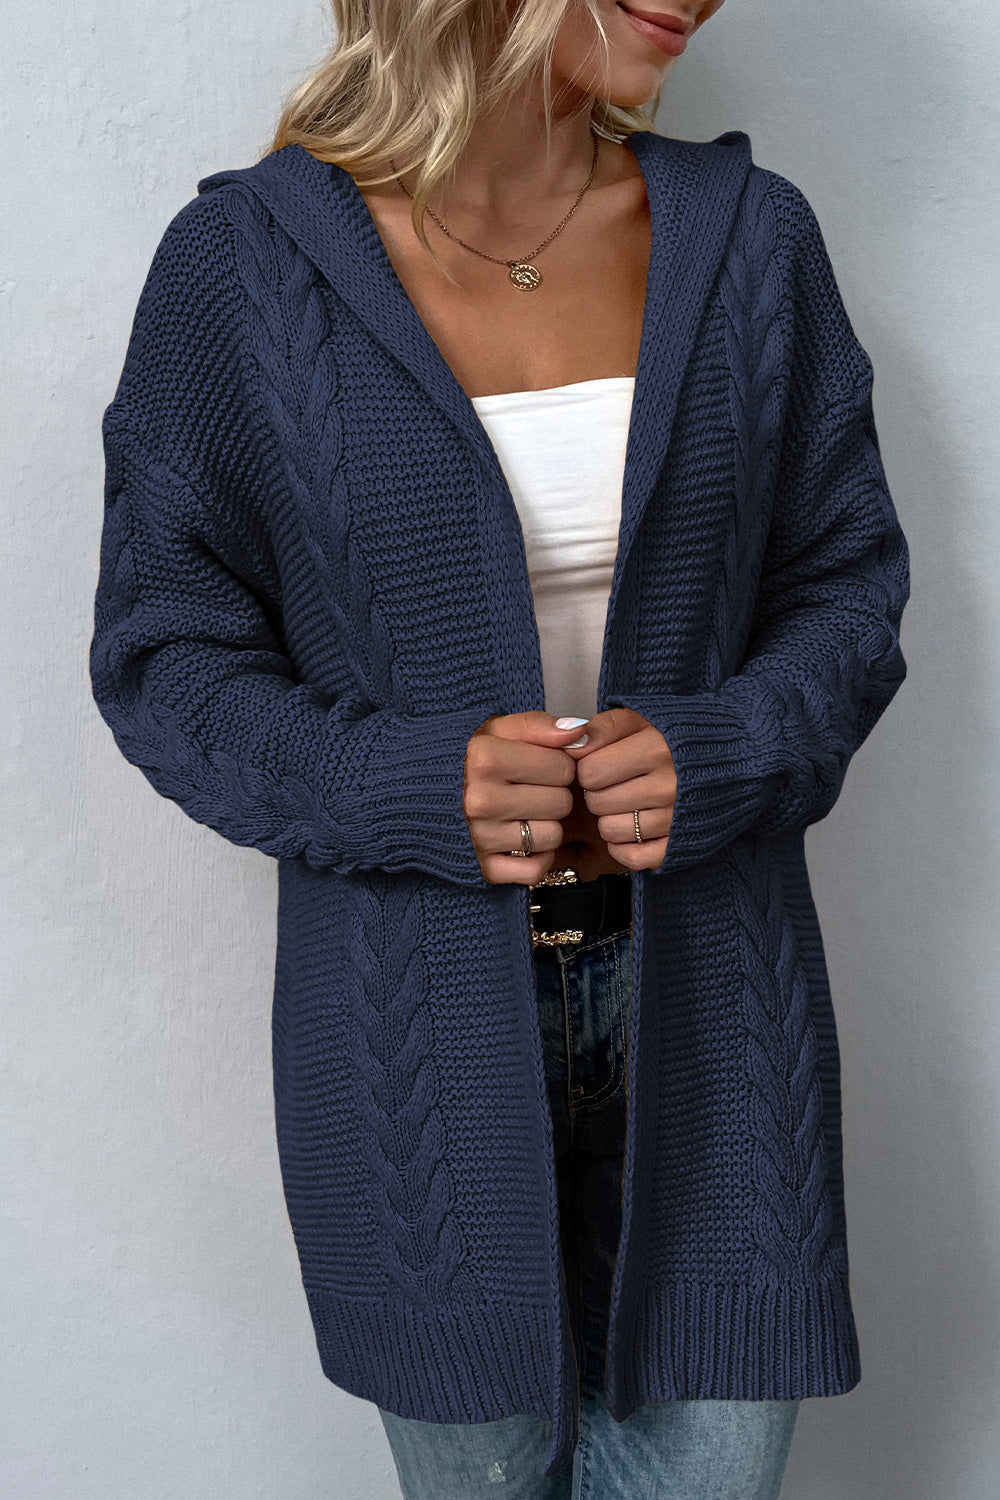 Cable-Knit Dropped Shoulder Hooded Cardigan - Dark Blue / S - Women’s Clothing & Accessories - Shirts & Tops - 7 - 2024